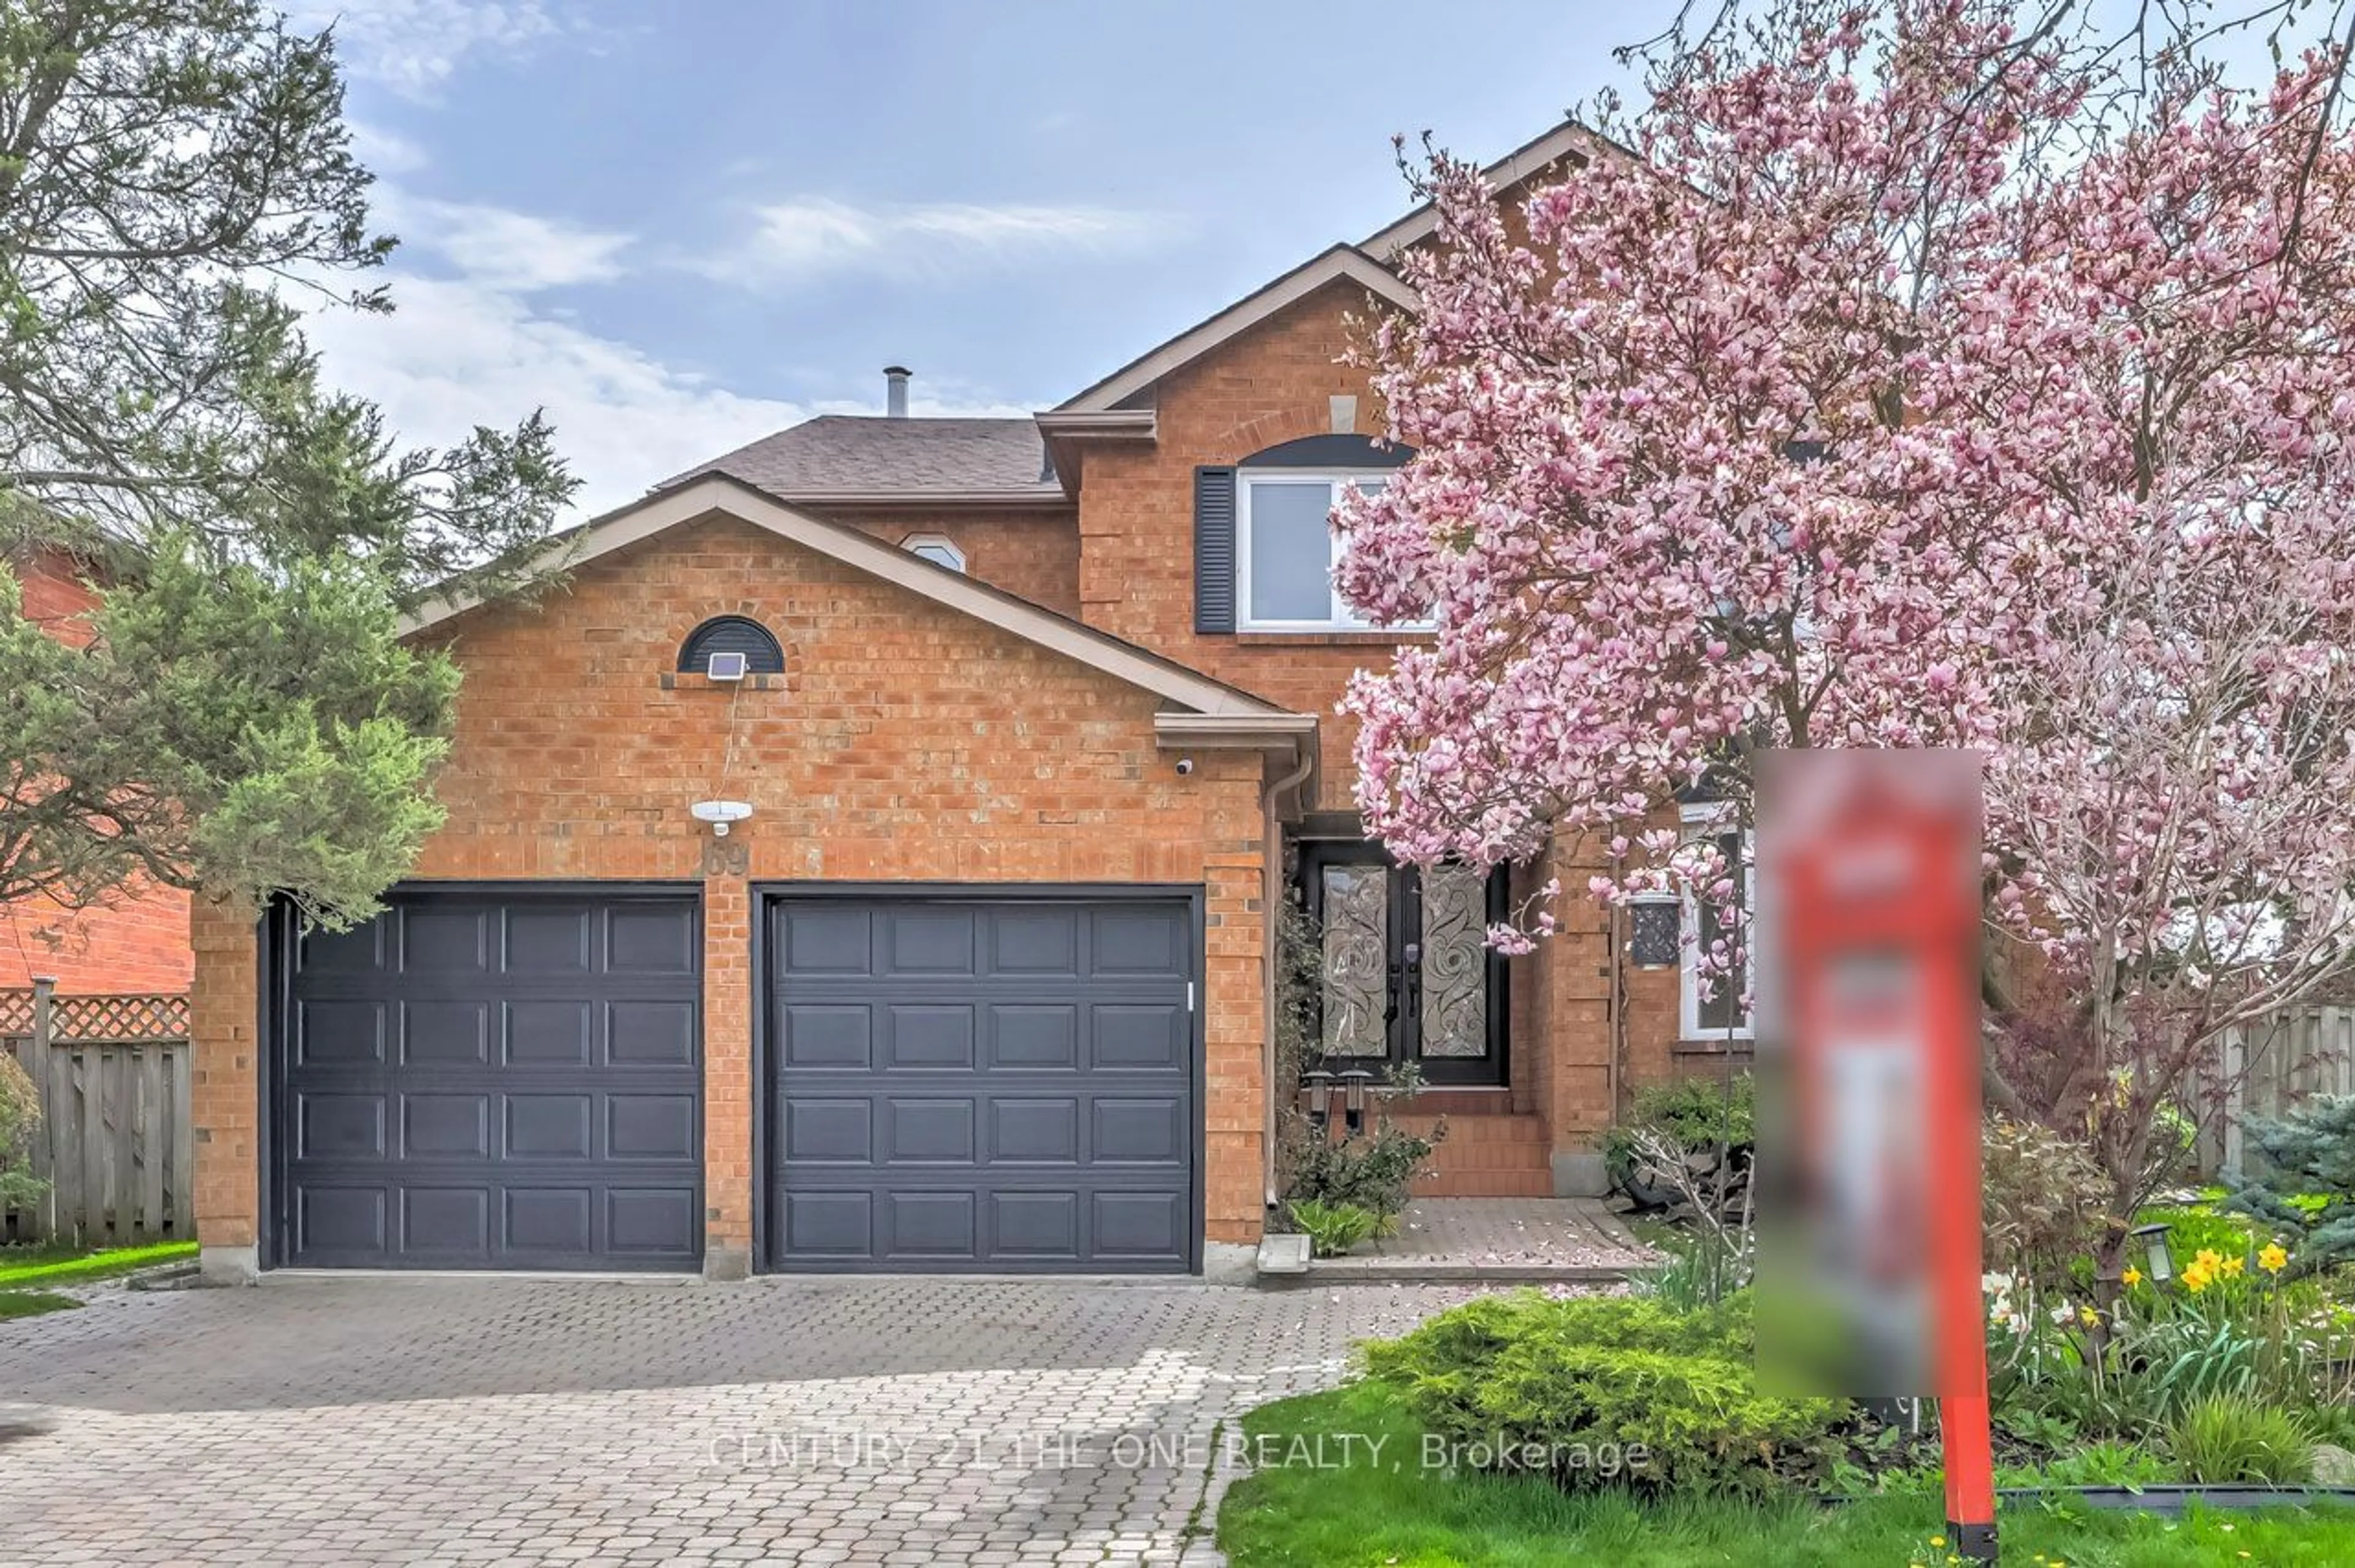 Home with brick exterior material for 69 Conistan Rd, Markham Ontario L3R 8K6